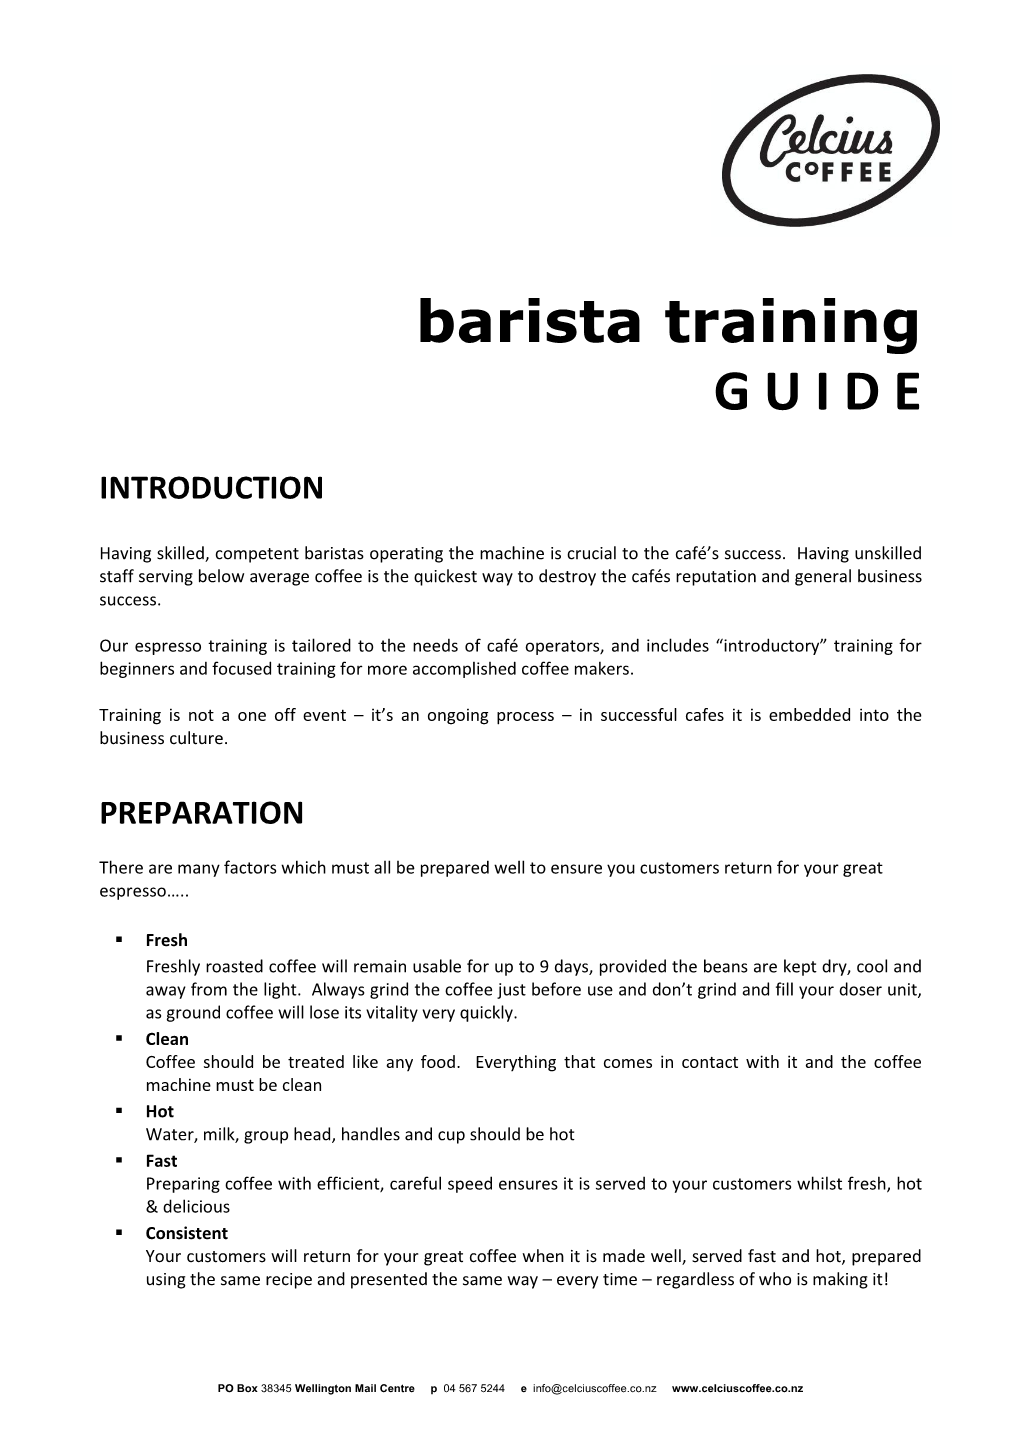 Download Our Barista Training Guide